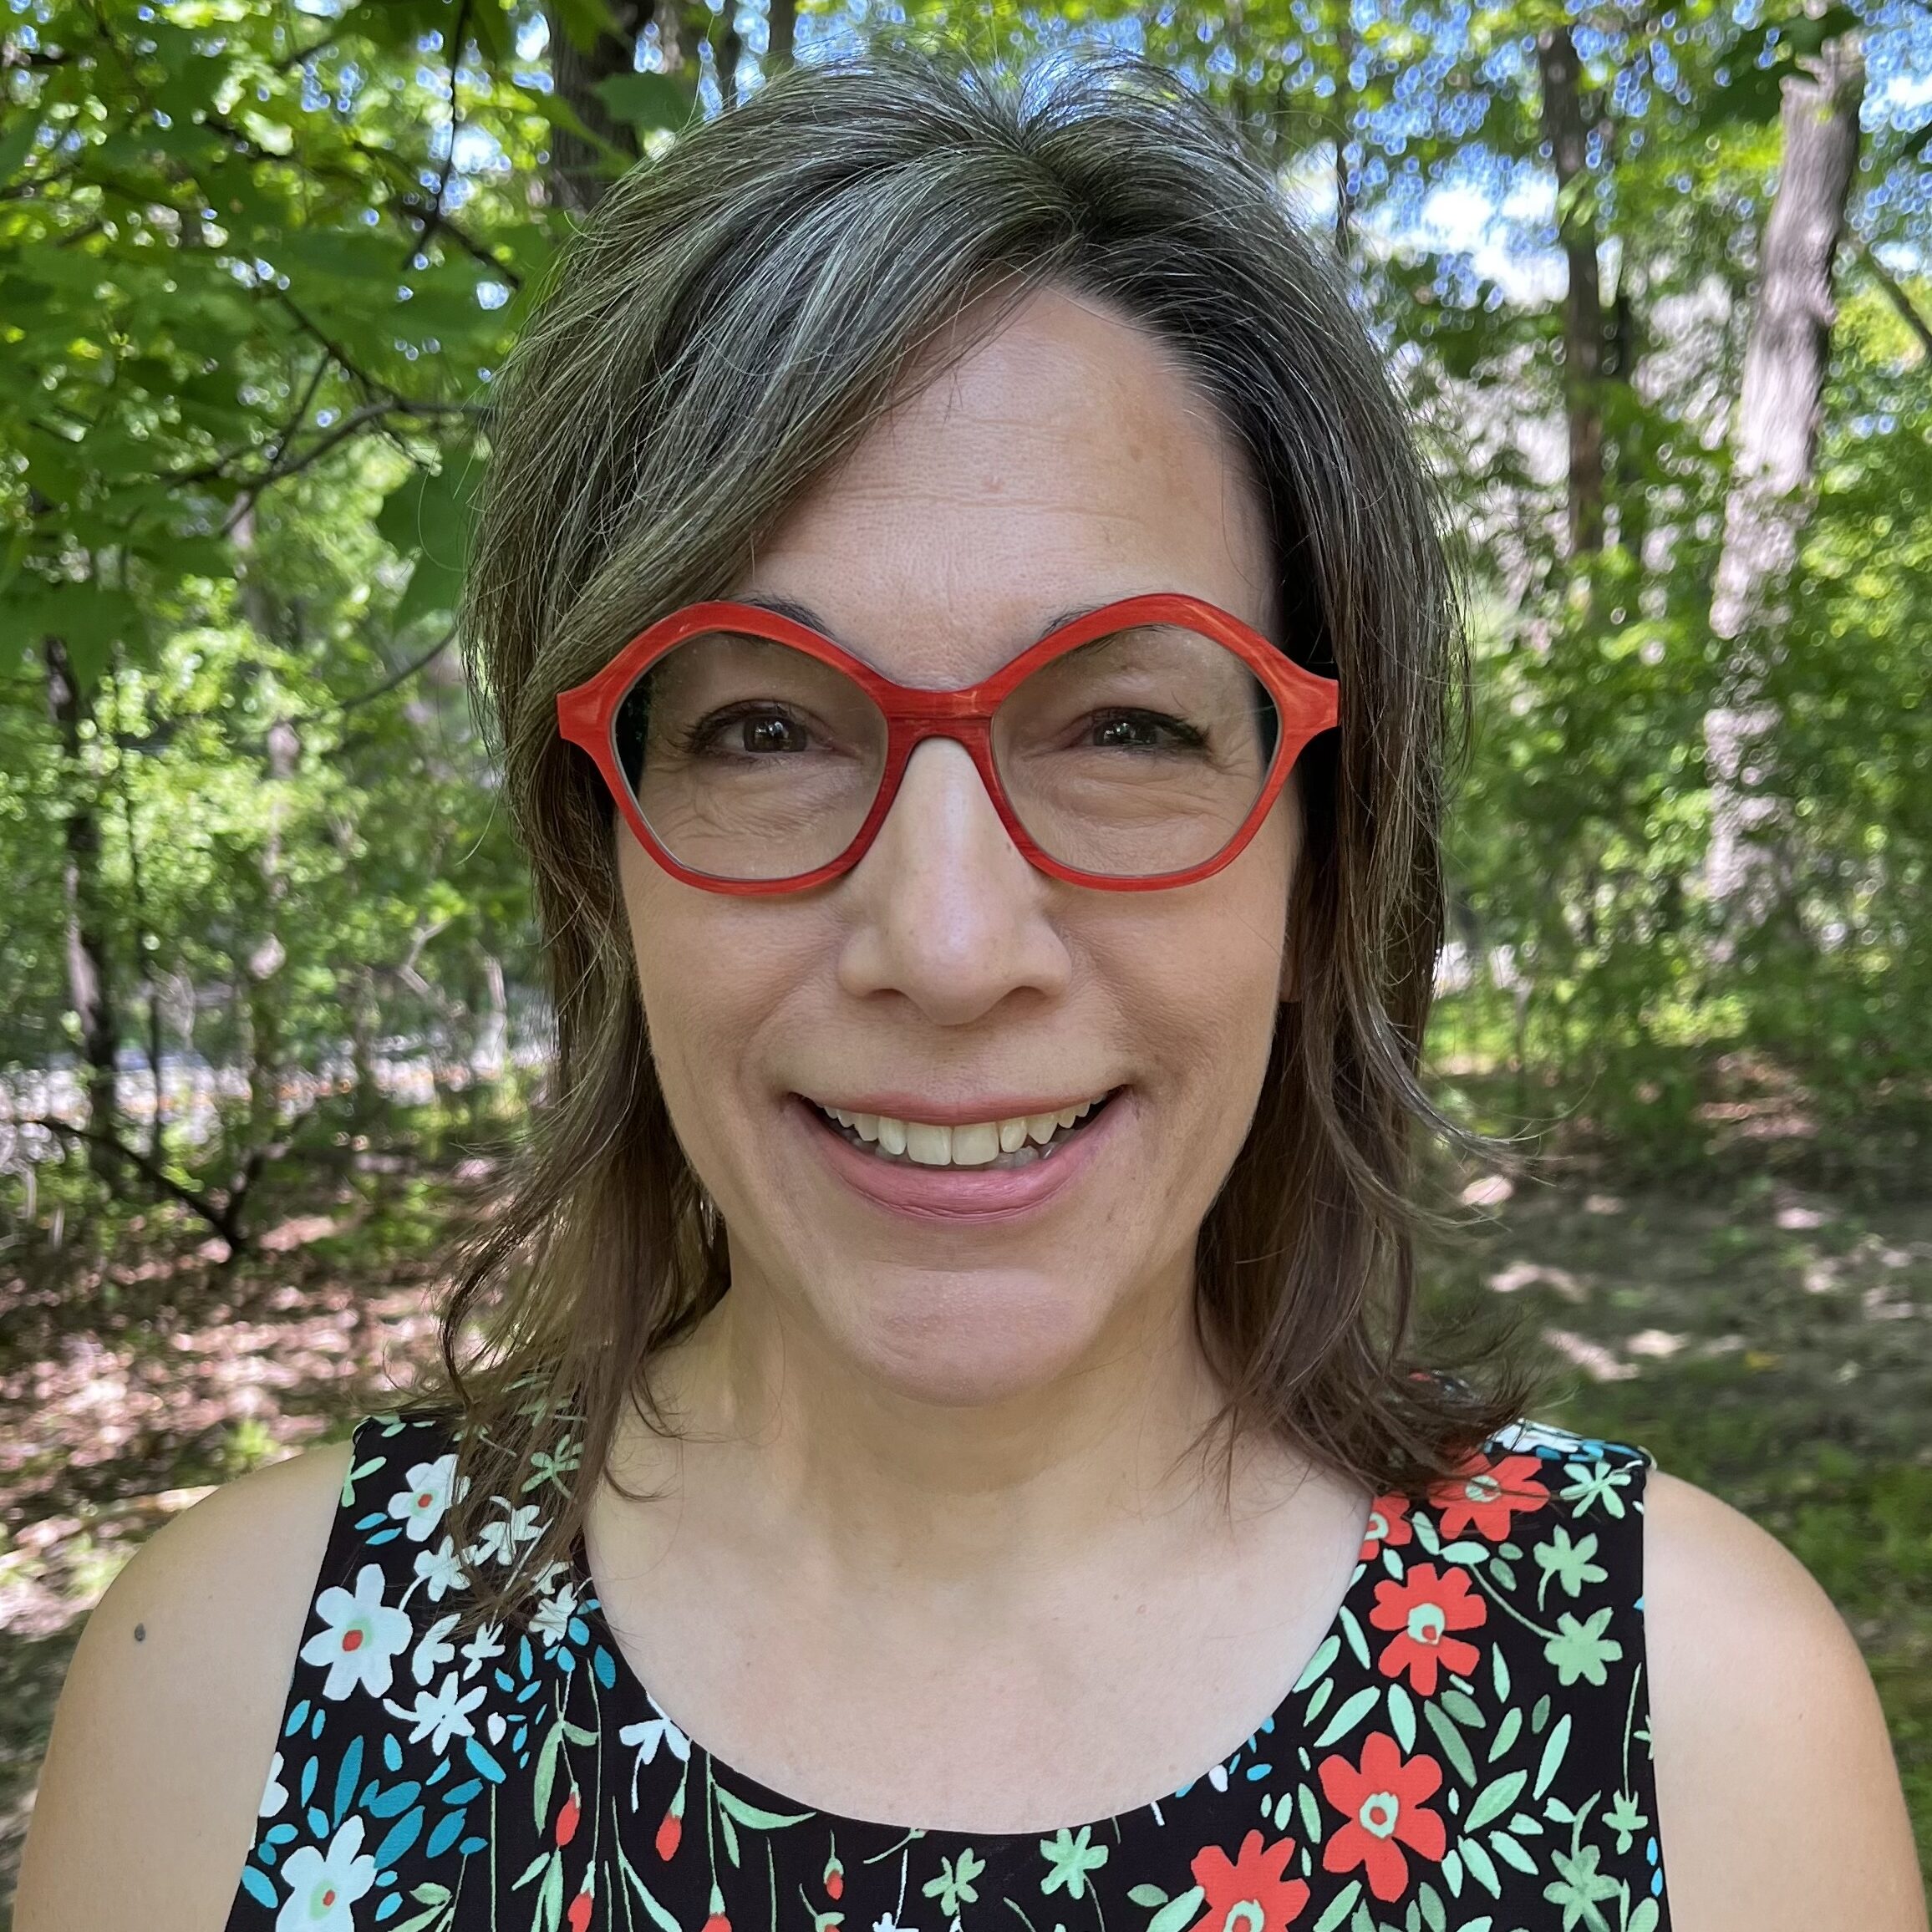 Portrait of Heidi Marty wearing red glasses and a floral top standing outside with trees in the background.